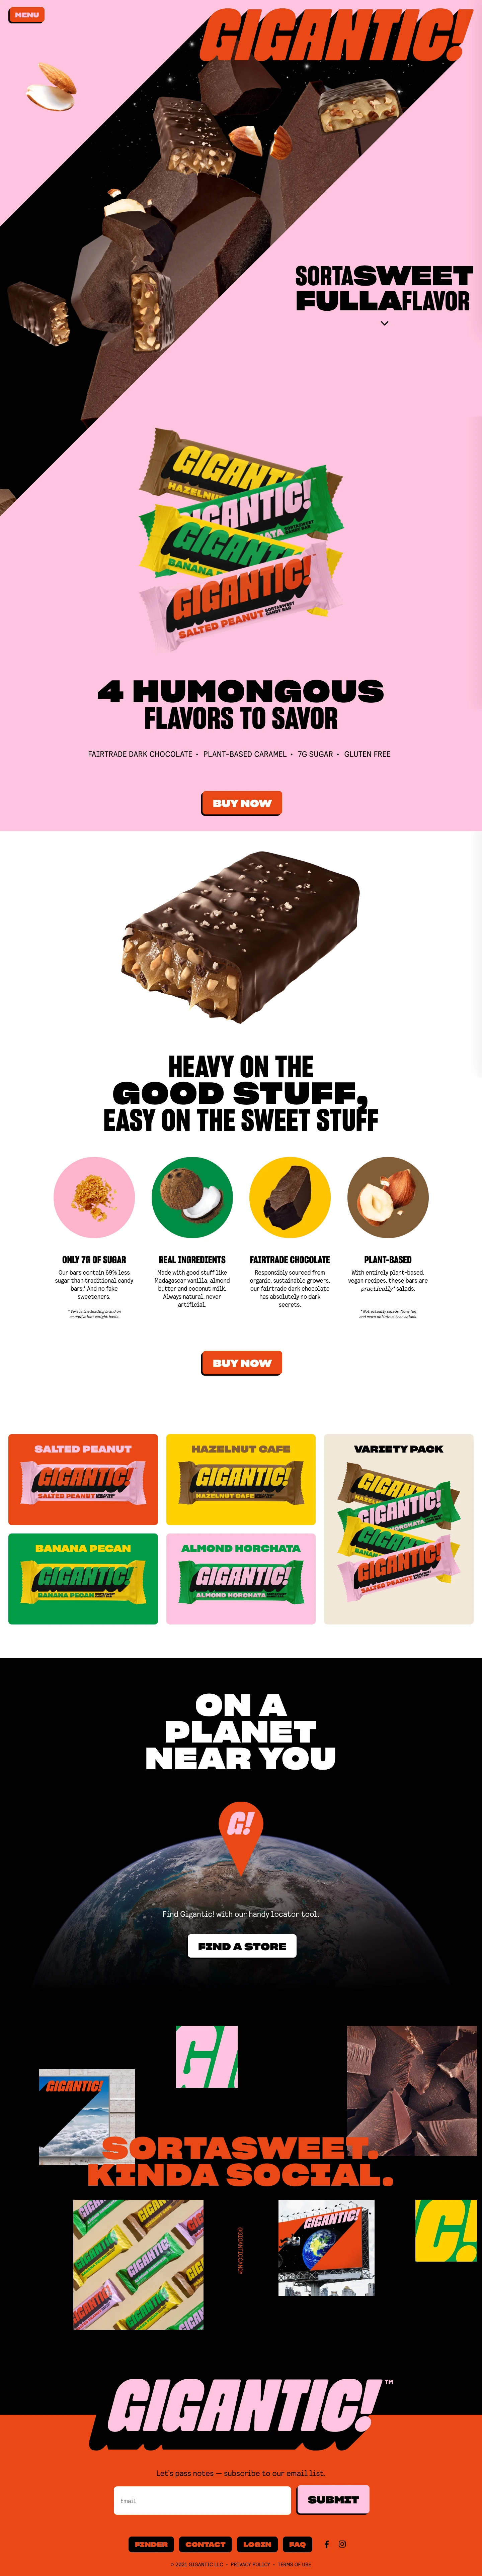 GIGANTIC! Landing Page Example: Introducing GIGANTIC!, the all-new, sortasweet candy bar for so-called adults. GIGANTIC! is fullaflavor and better for you, made from real-food ingredients, like Fairtrade dark chocolate and plant-based caramel. GIGANTIC! delivers that traditional candy bar rush without the super-sweet, junk-food crash.